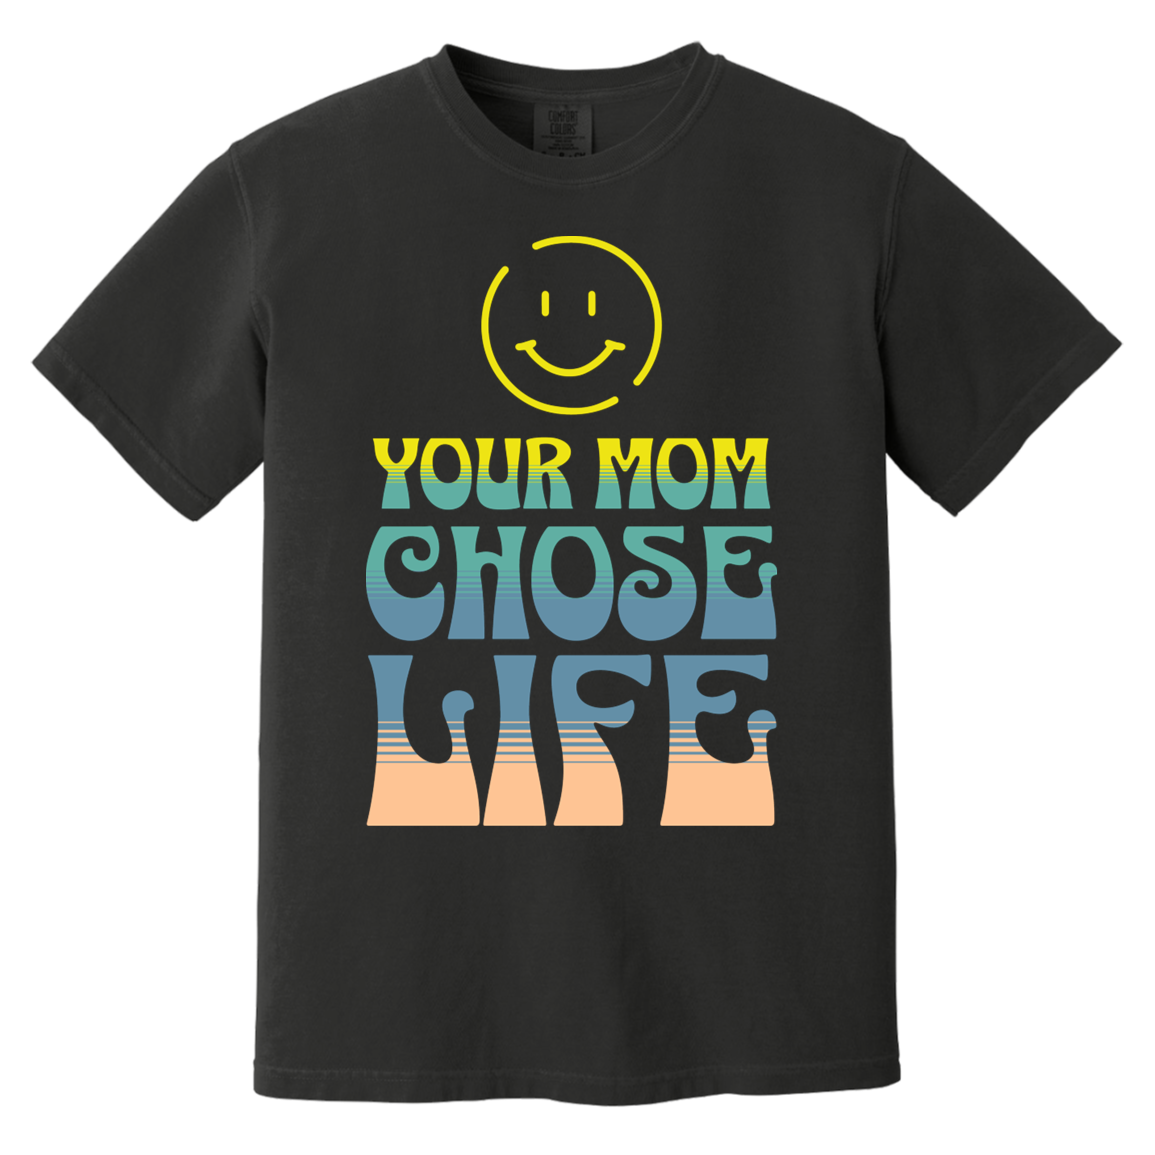 Prolife tshirt for prolifers, march for life, pro-life message your mom chose life-T-Shirts-PureDesignTees